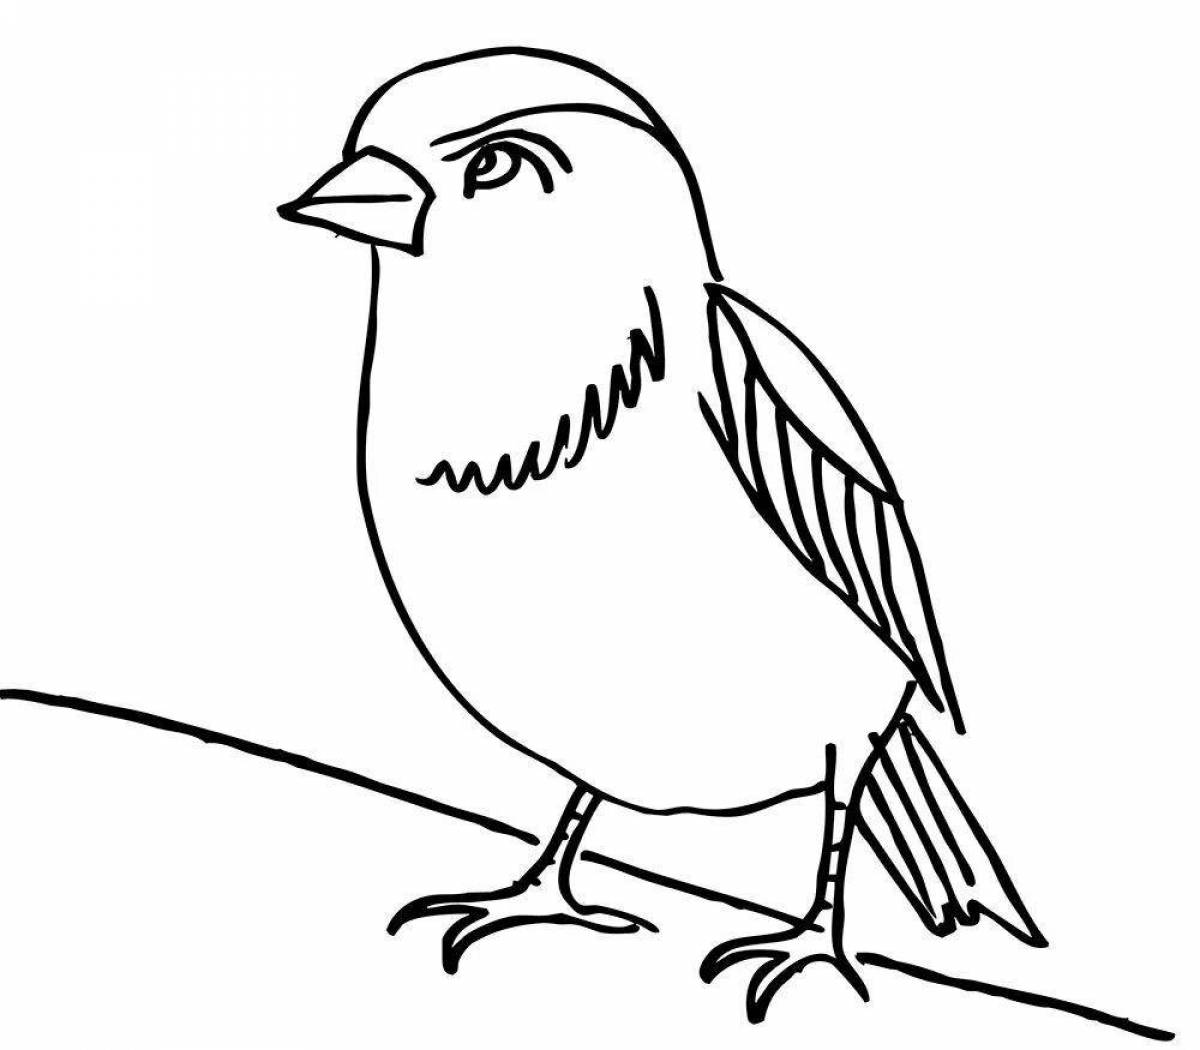 Coloring sparrow for kids